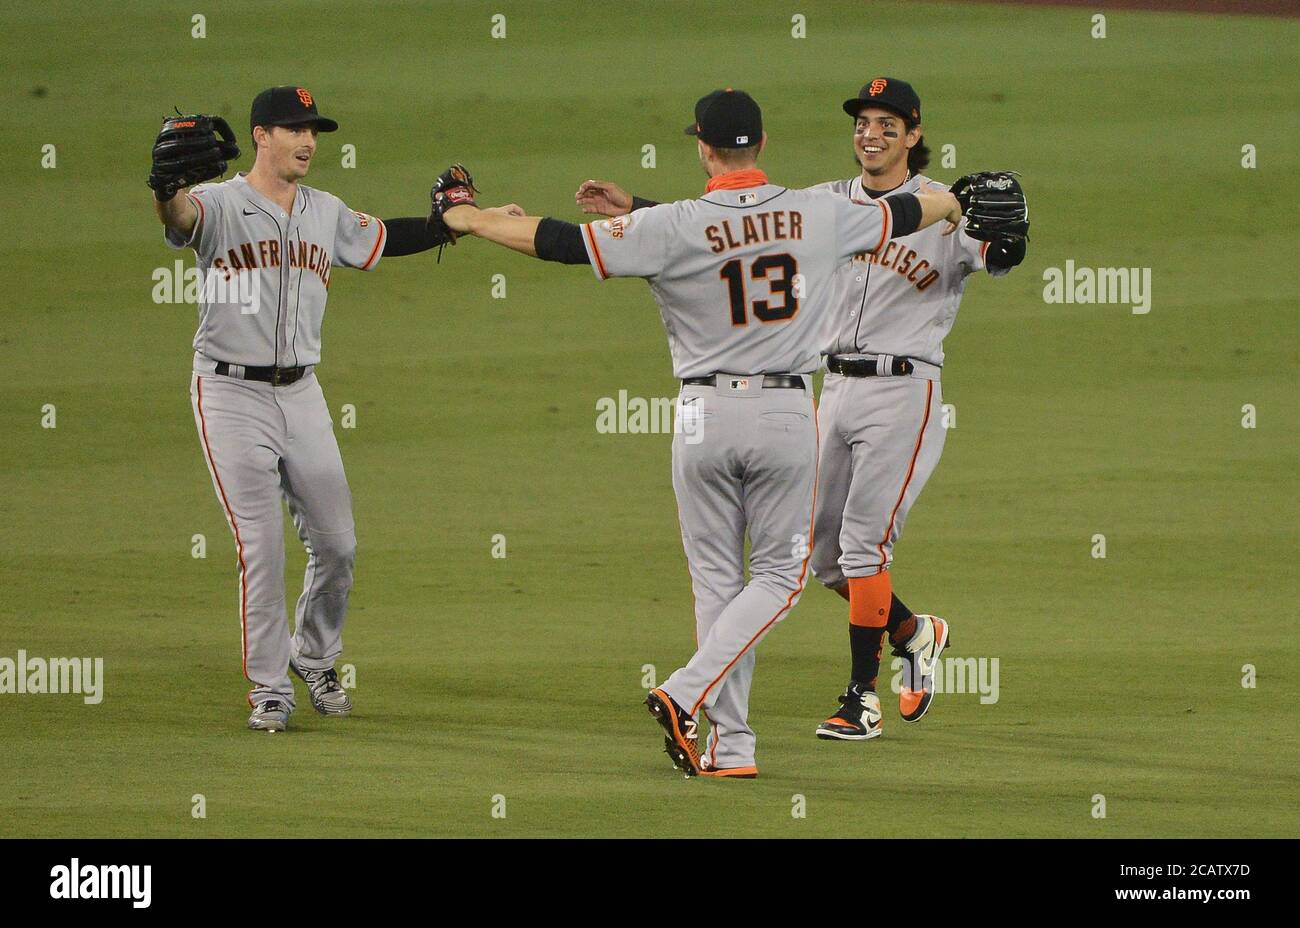 Los Angeles, United States. 09th Aug, 2020. San Francisco Giants' outfielders celebrate their 5-4 victory over the Los Angeles Dodgers at Dodger Stadium in Los Angeles on Saturday, August 8, 2020. Photo by Jim Ruymen/UPI Credit: UPI/Alamy Live News Stock Photo